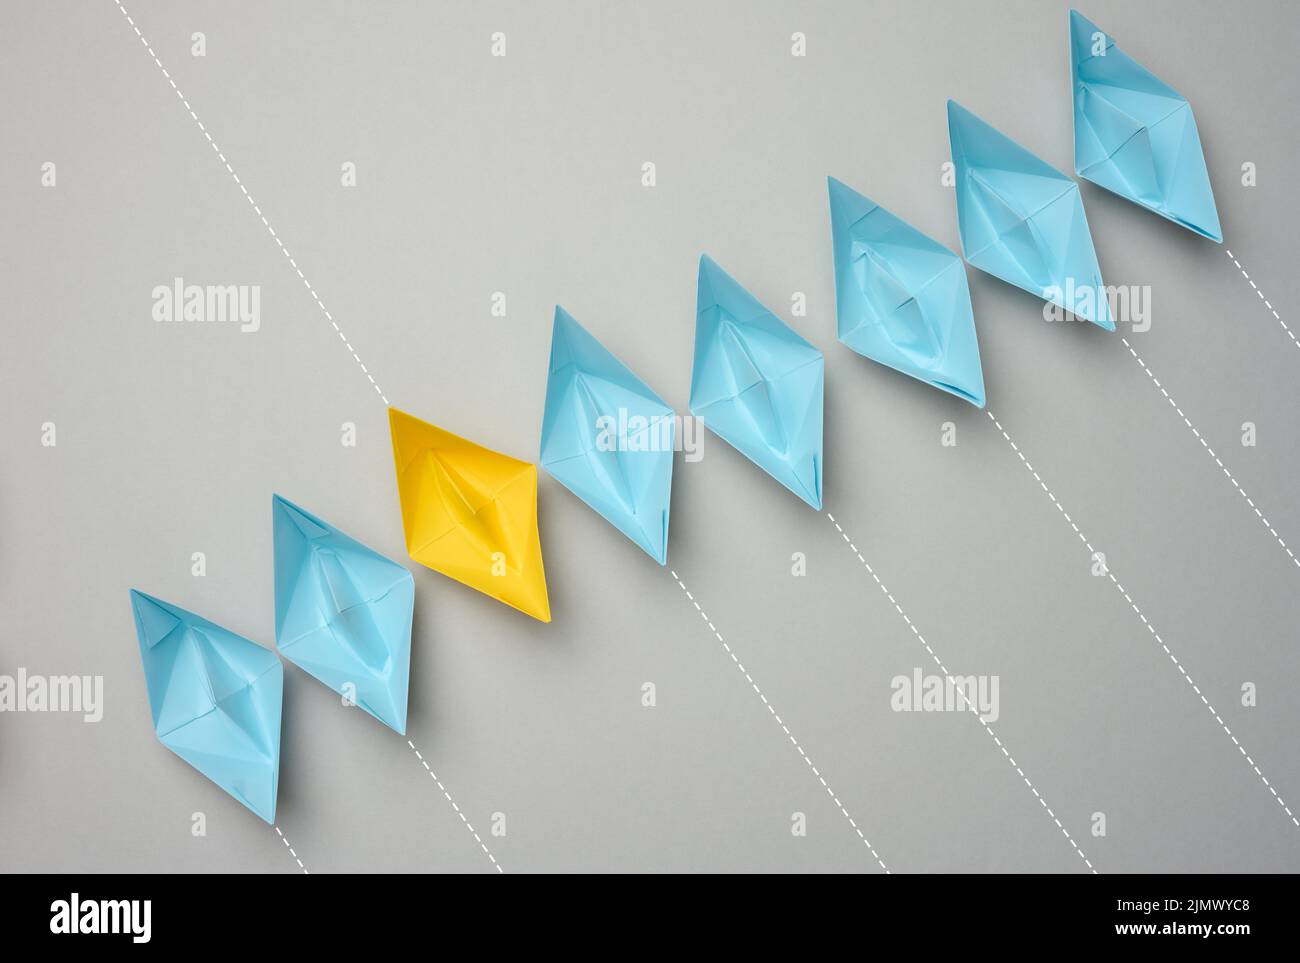 A row of paper boats on a gray background, yellow is moving in the opposite direction Stock Photo